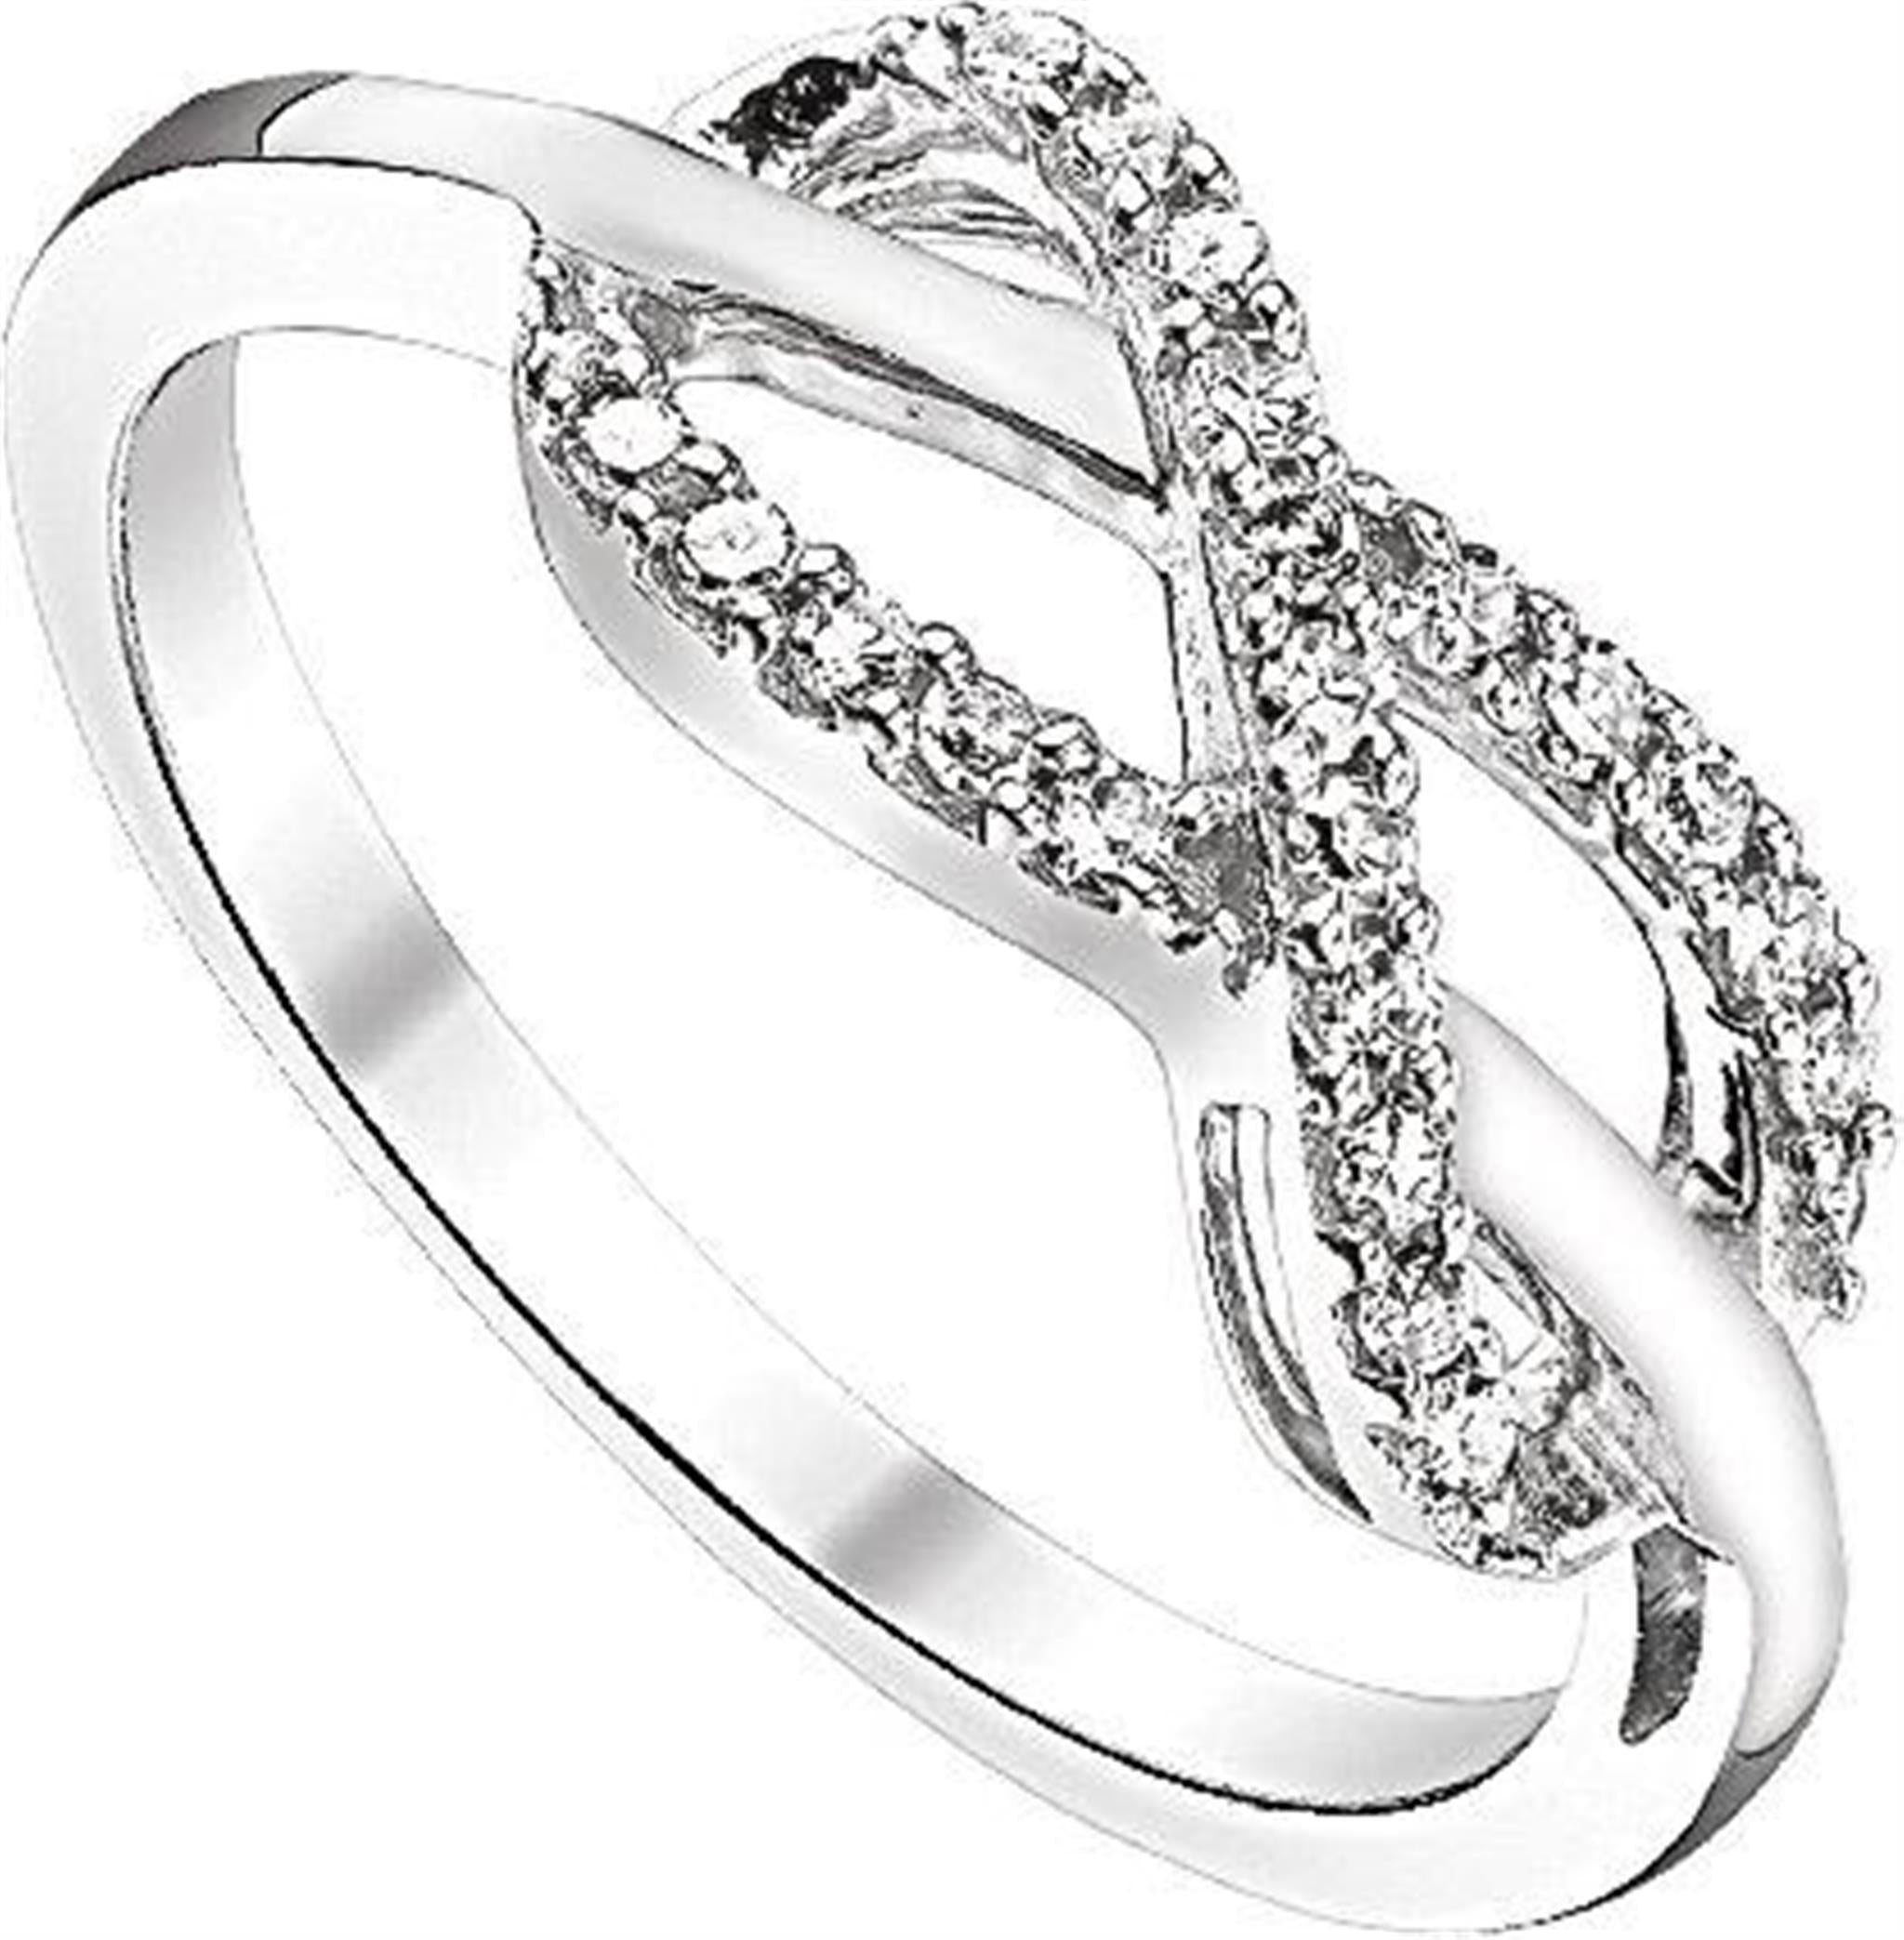 JewelersClub 0.925 Sterling Silver Infinity Friendship Ring for Women |  Personalized You & Me Eternity Knot Symbol Band - Walmart.com